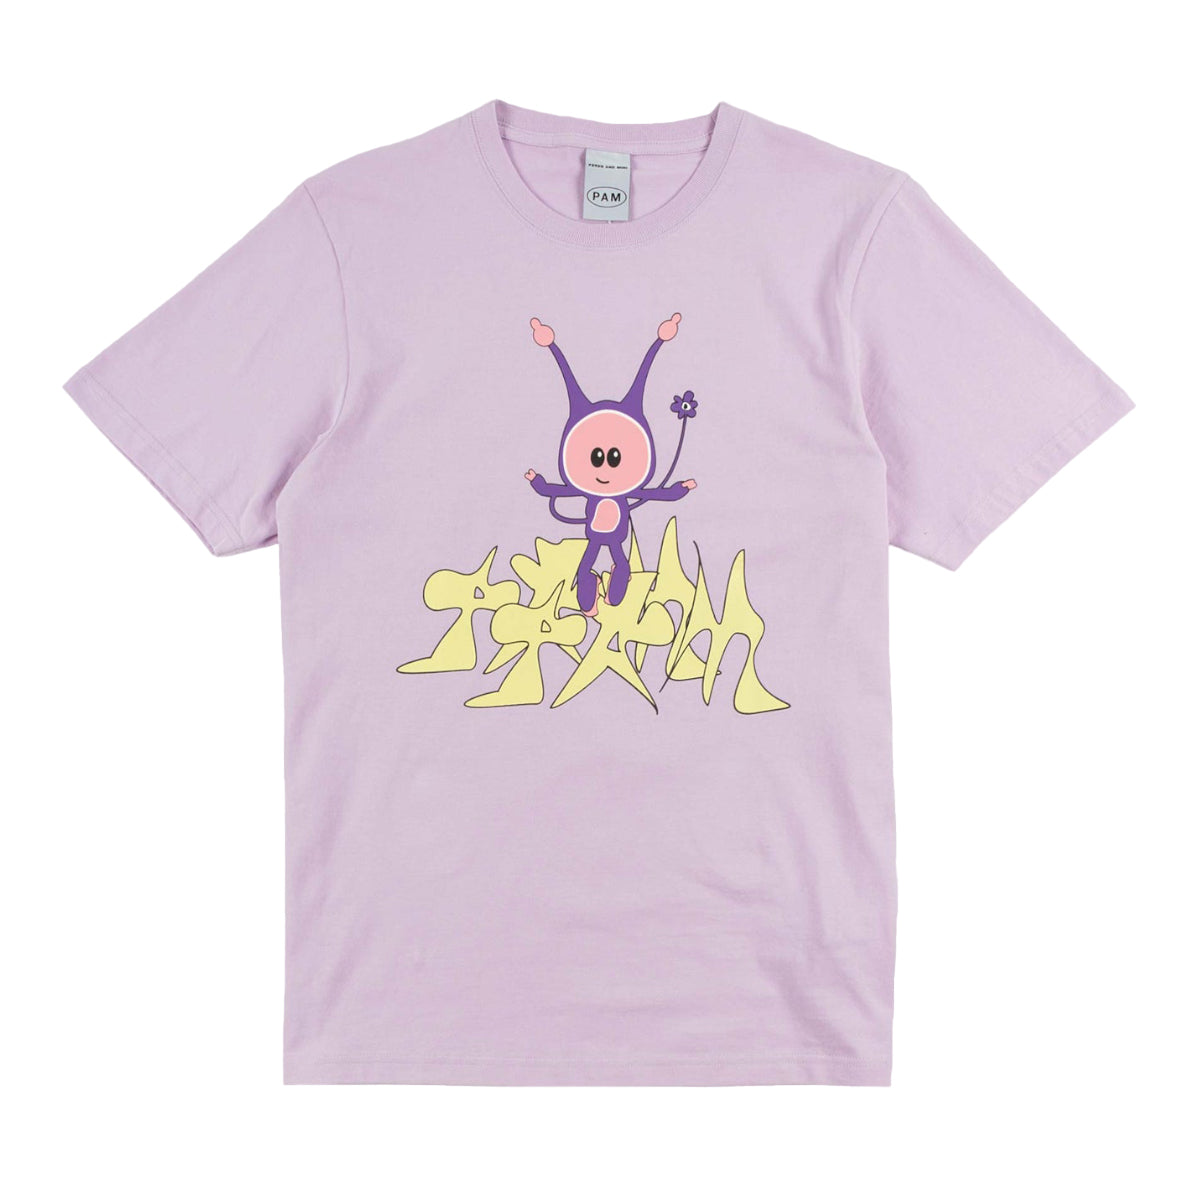 P.A.M (Perks & Mini) - P.A.M - Formationz SS Tee - Lilac